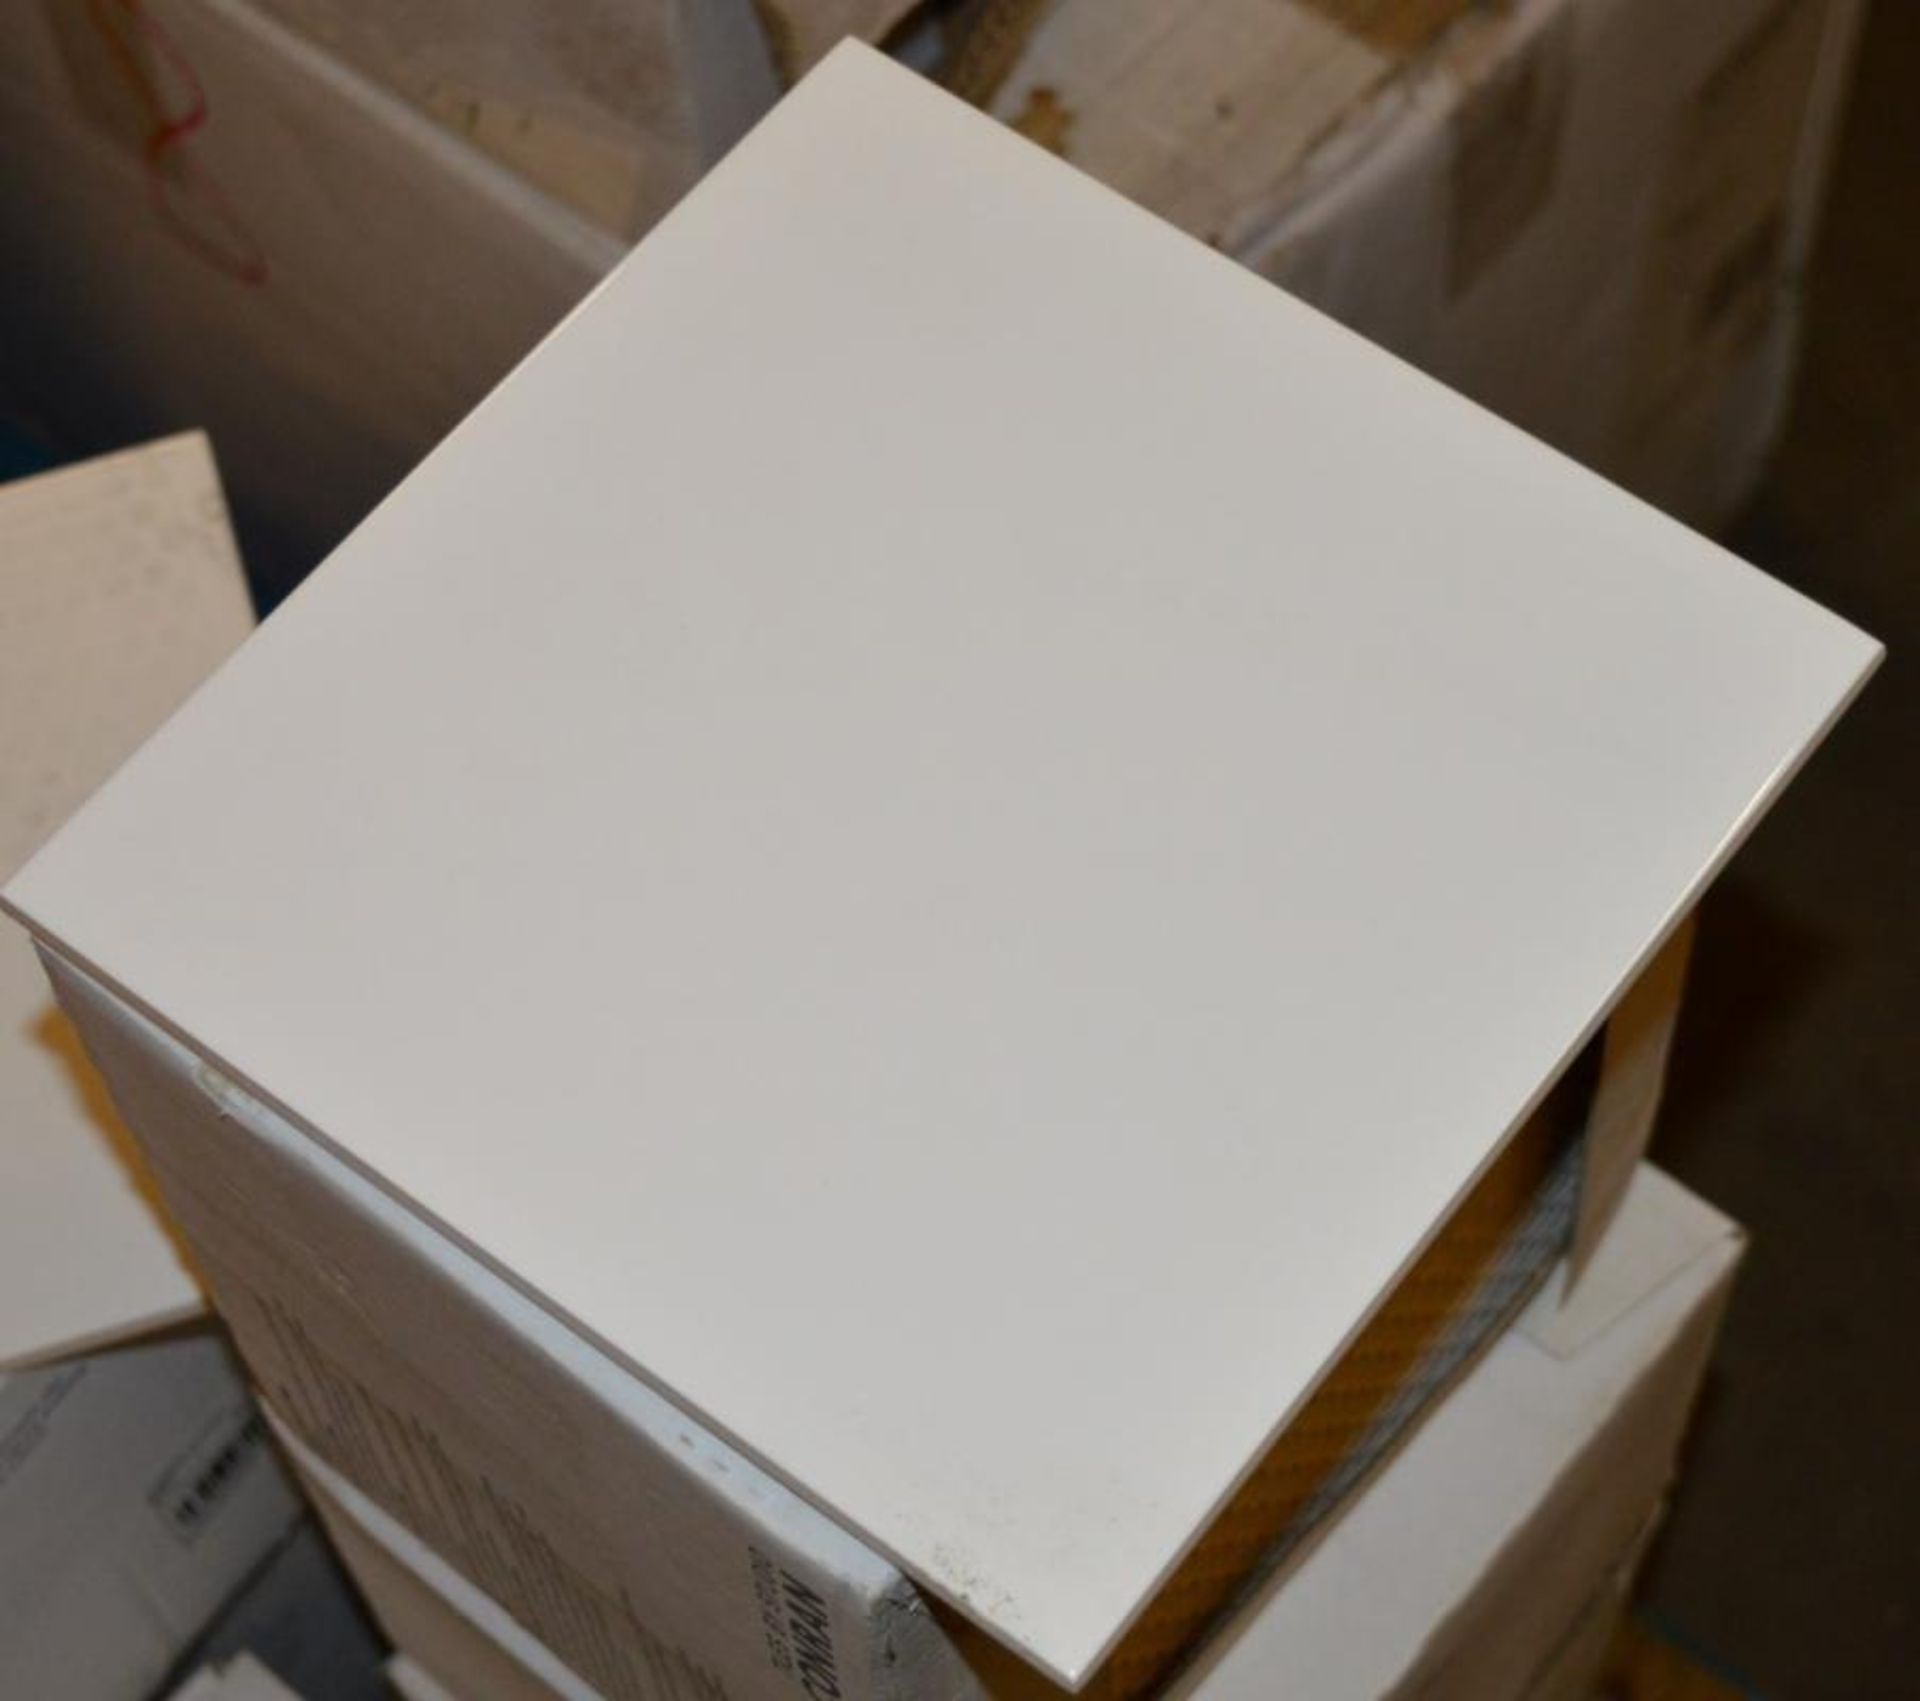 6 x Boxes of Conran Glazed Ceramic Wall Tiles in Gloss White - Size 200 x 200mm - Each Box